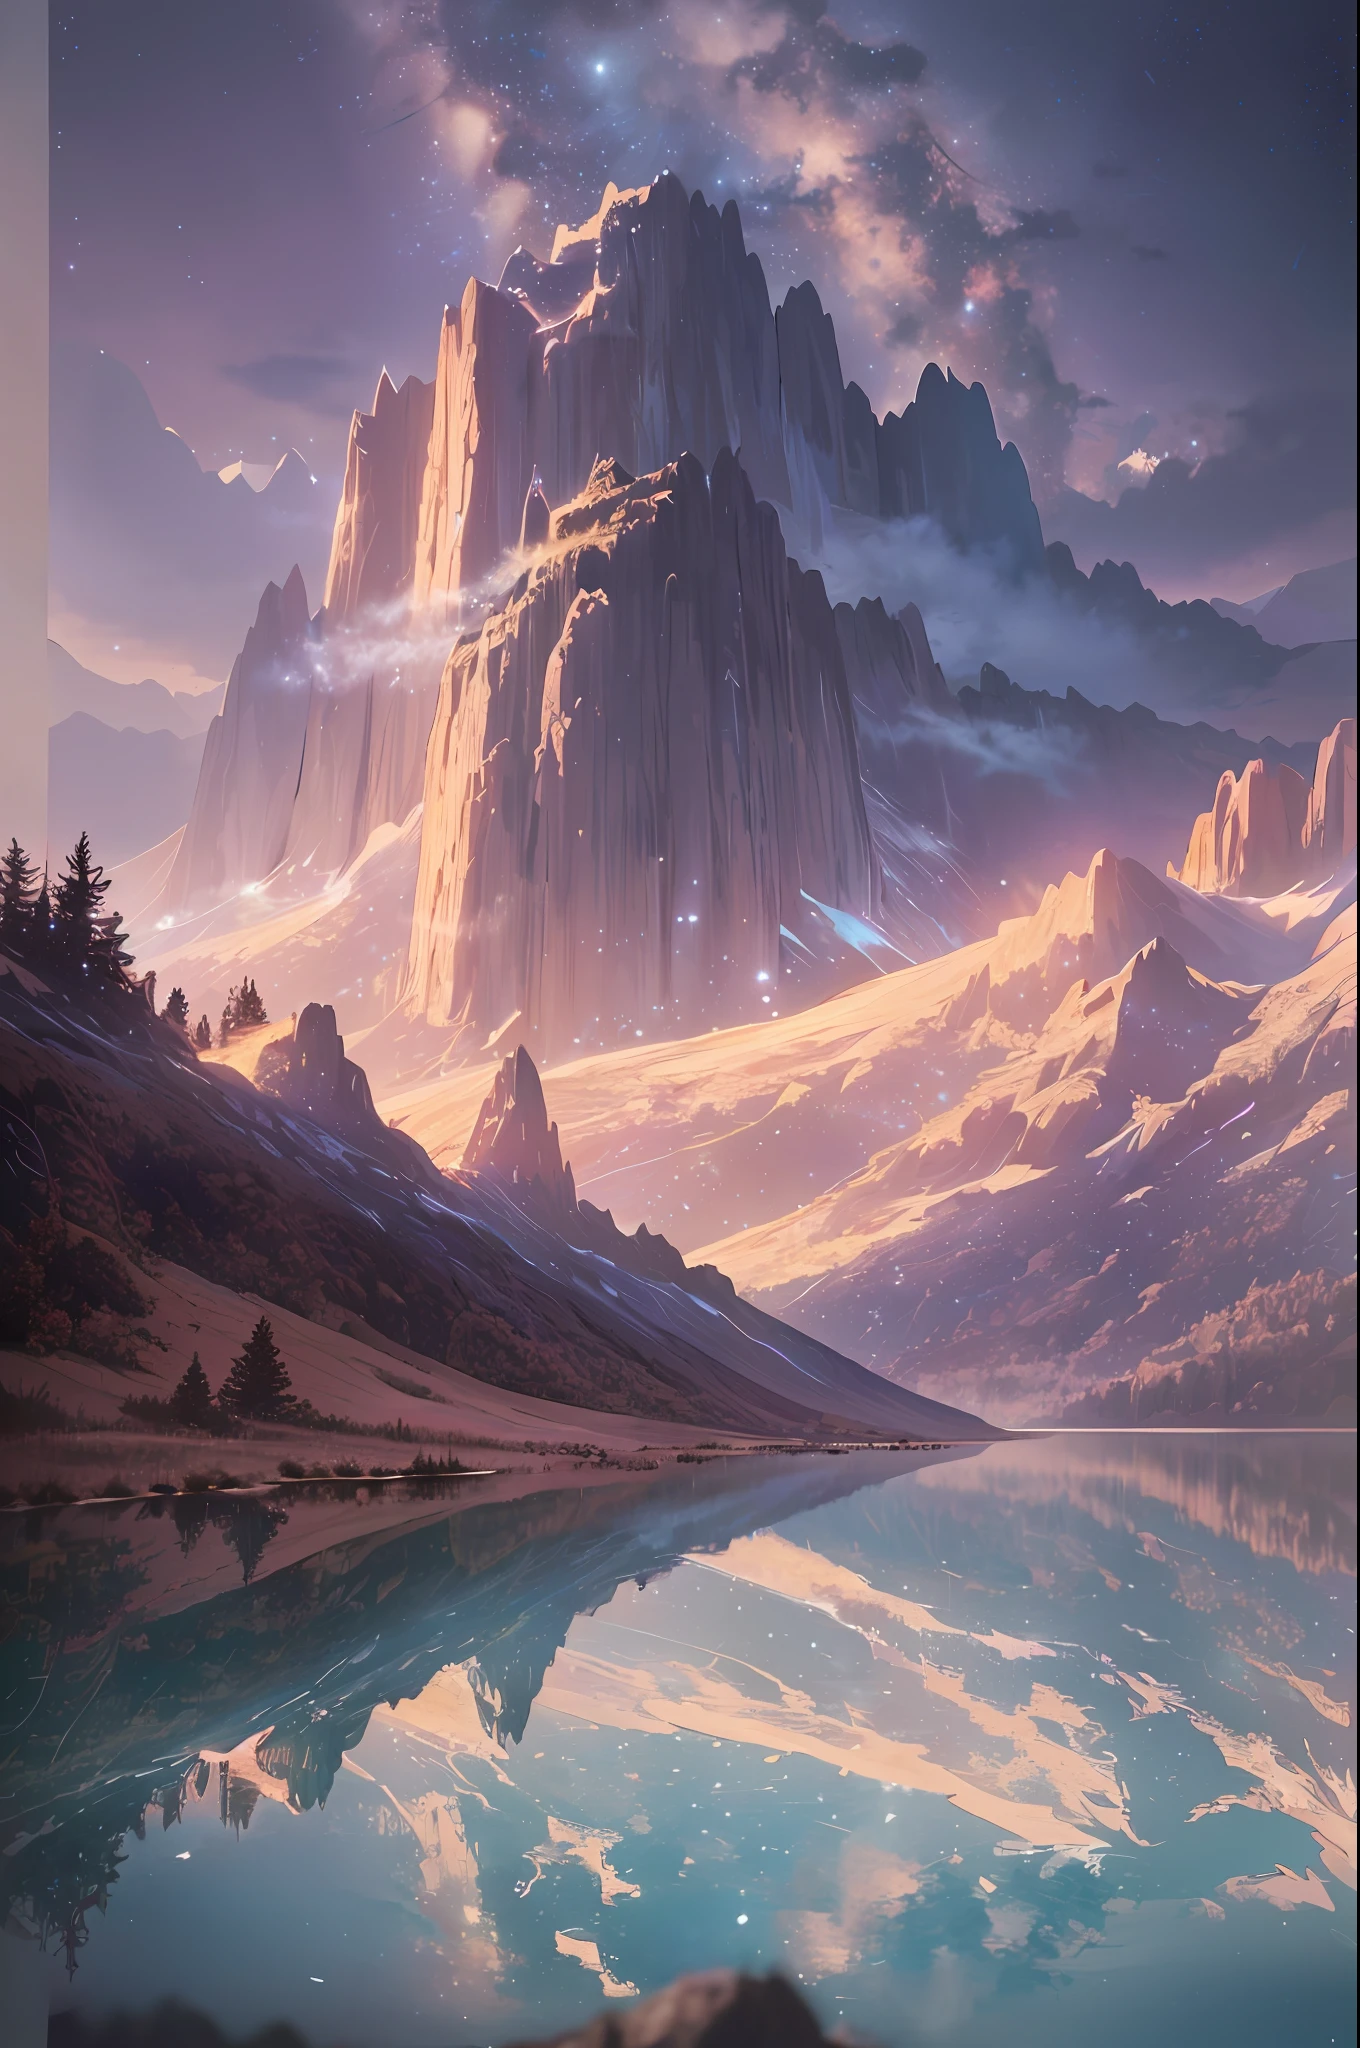 Starry Sky with Mountains and Lake, Jessica Rossier, Inspired by Jessica Rossier, Jessica Rossier Fantasy Art, Concept Art Magic Highlights, Official Artwork, Dream Painting, Ethereal Realm, Atmospheric artwork, dreamy matte paintings, serene endless stars inspired by Ted Nasmith, moonlit starry environments, epic music album covers.